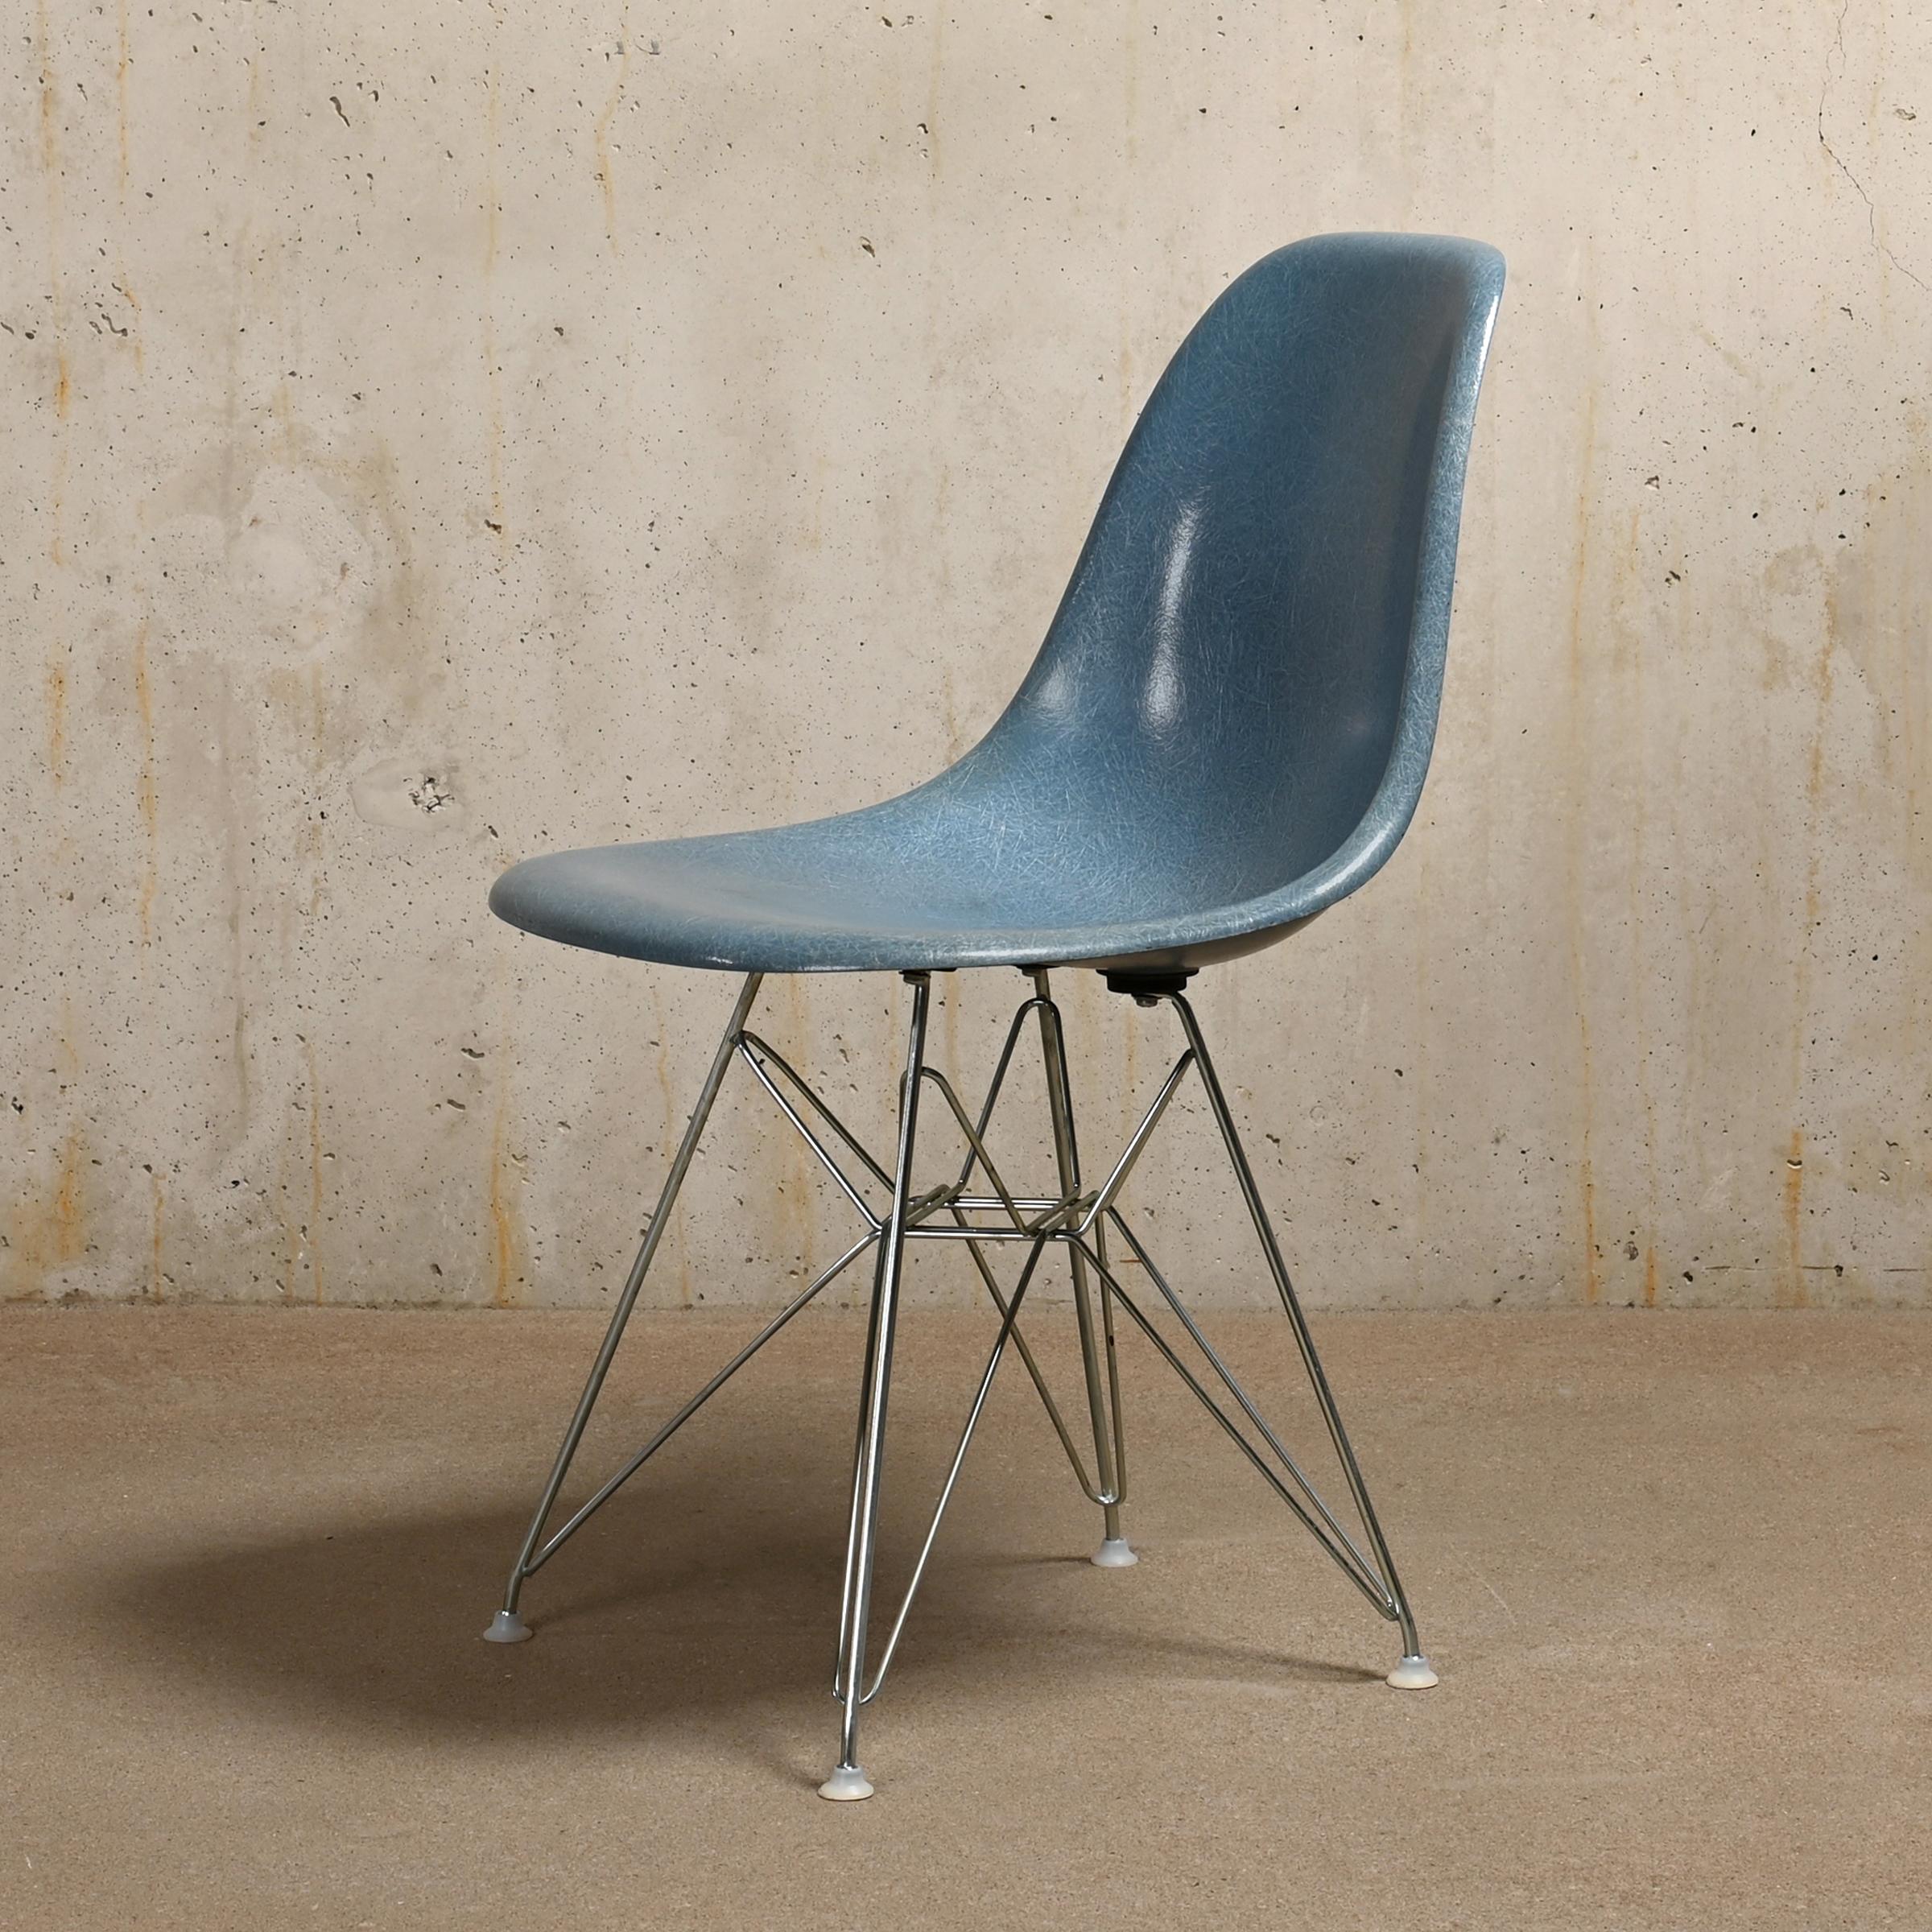 Mid-20th Century Charles & Ray Eames DSR Side Chair Ocean Blue for Vitra / Herman Miller